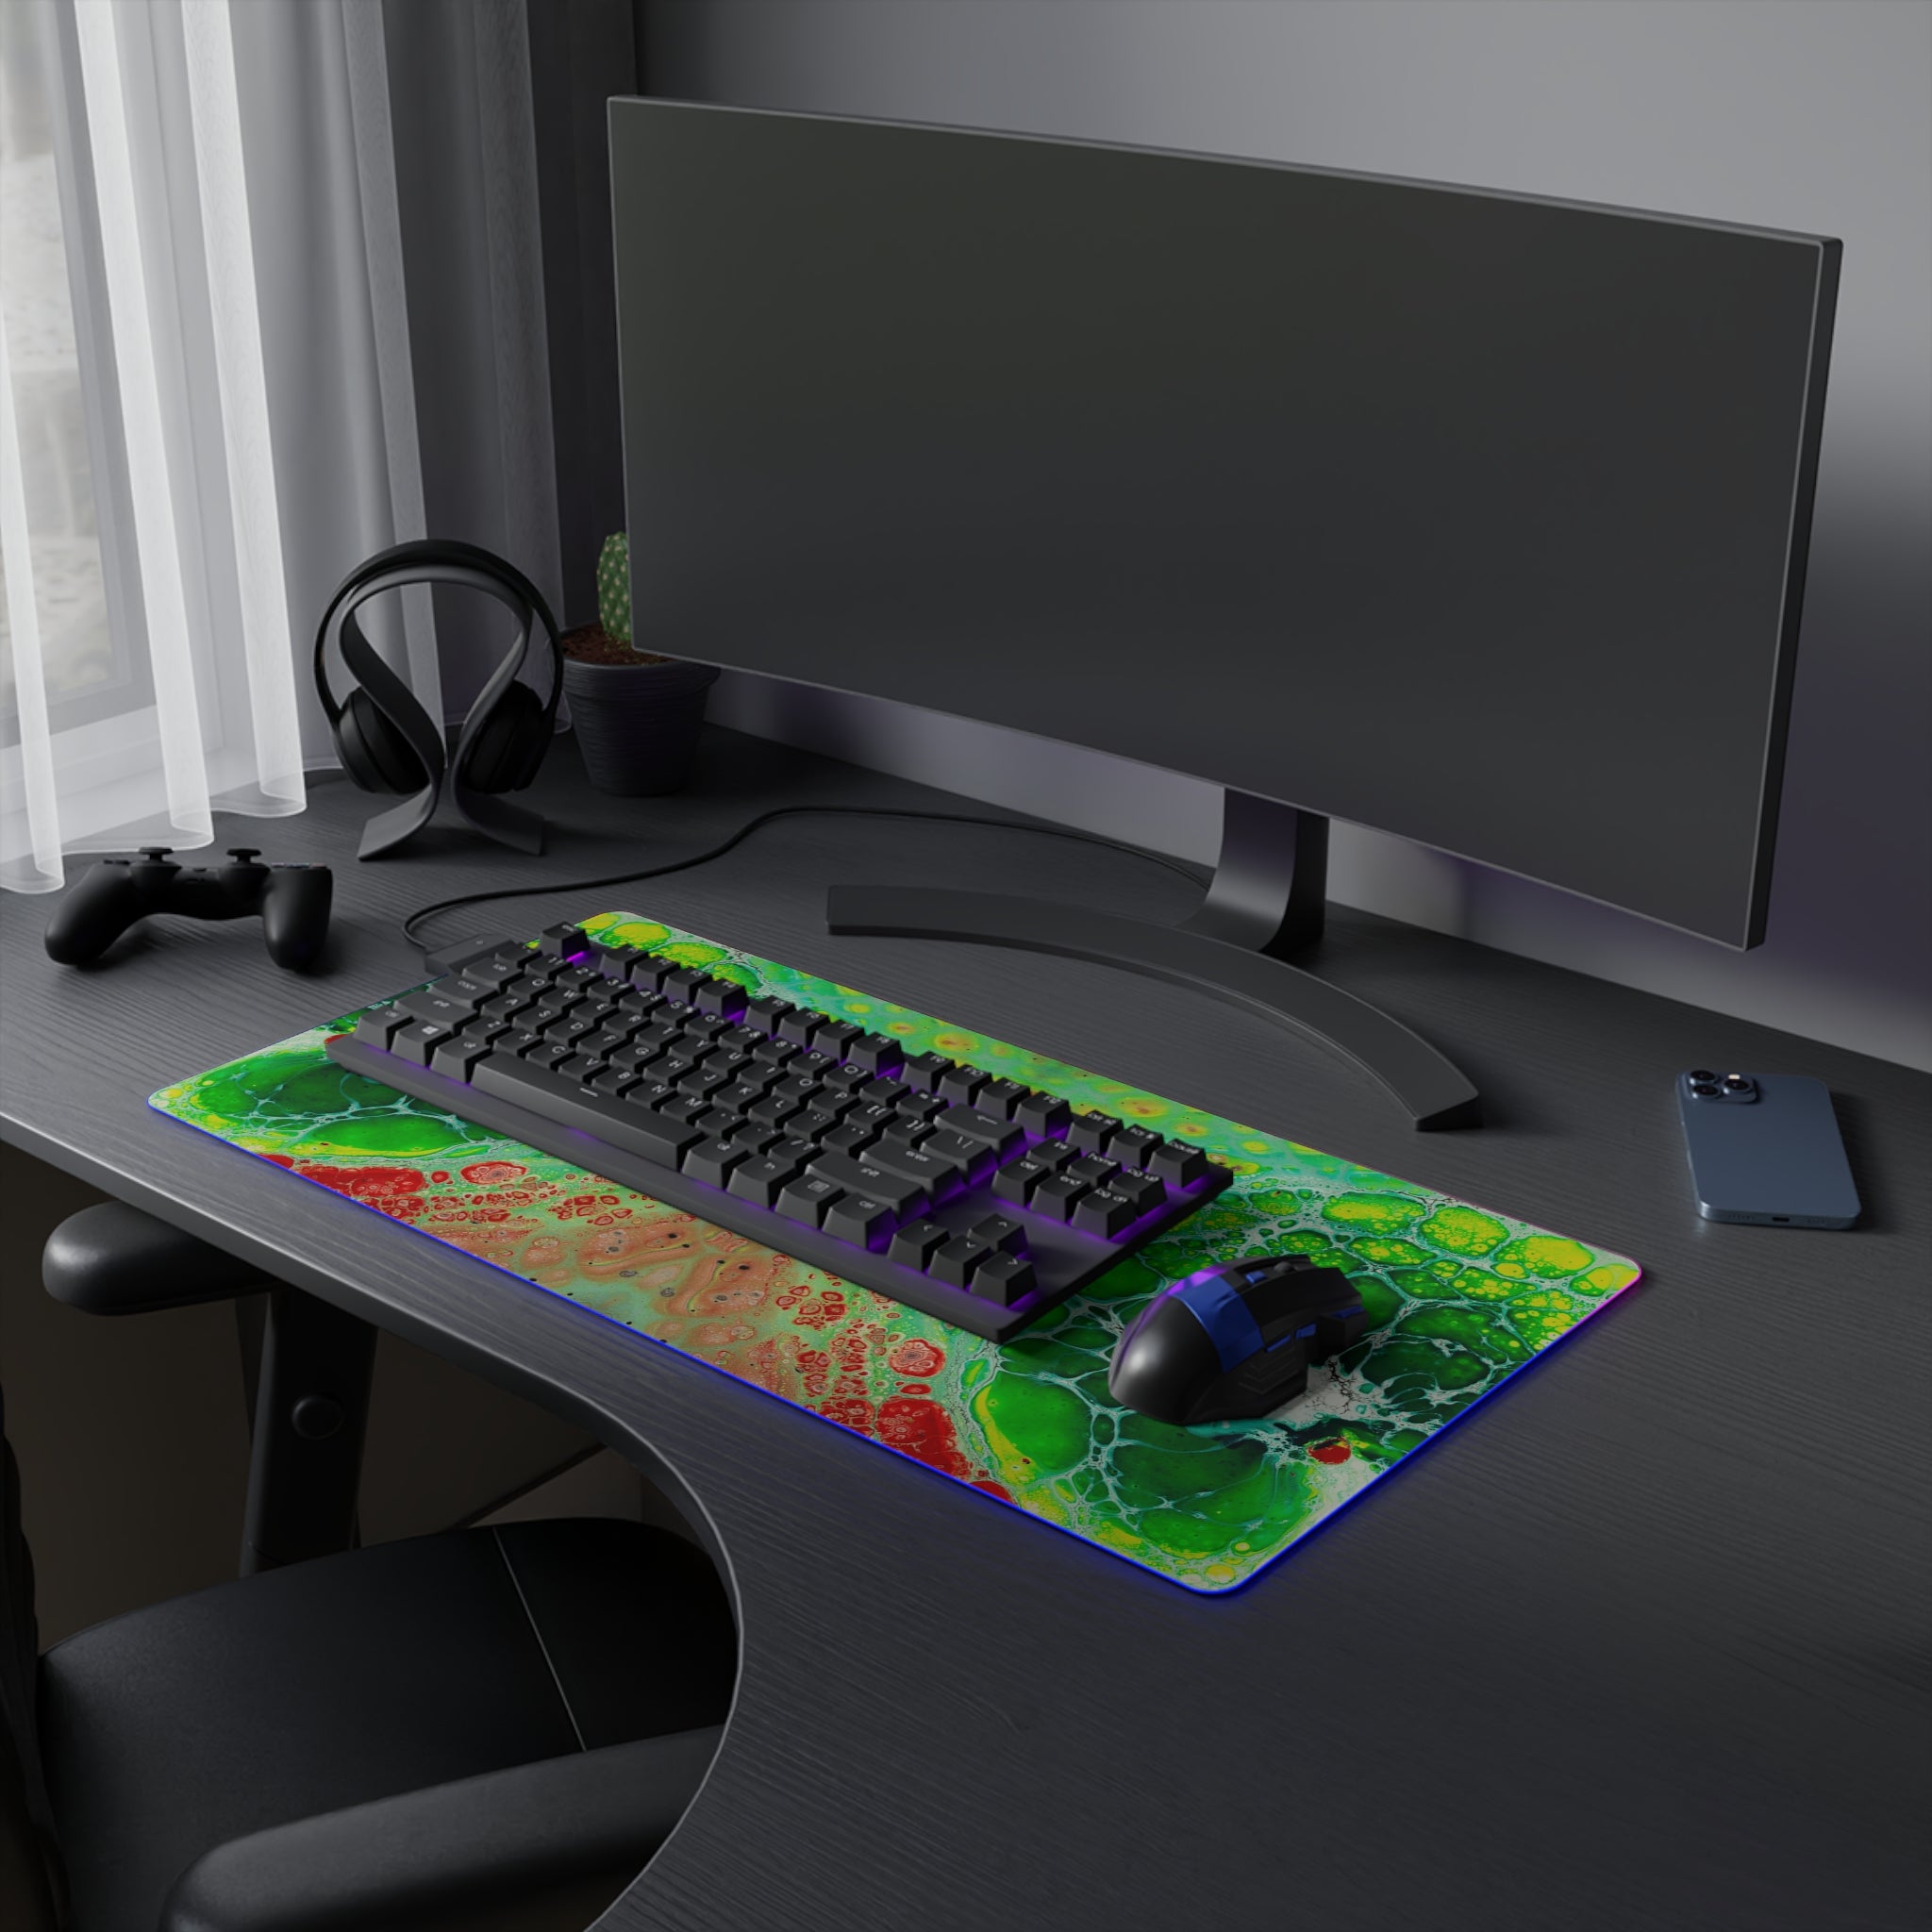 Cameron Creations - LED Gaming Mouse Pad - Up Close - Concept 2